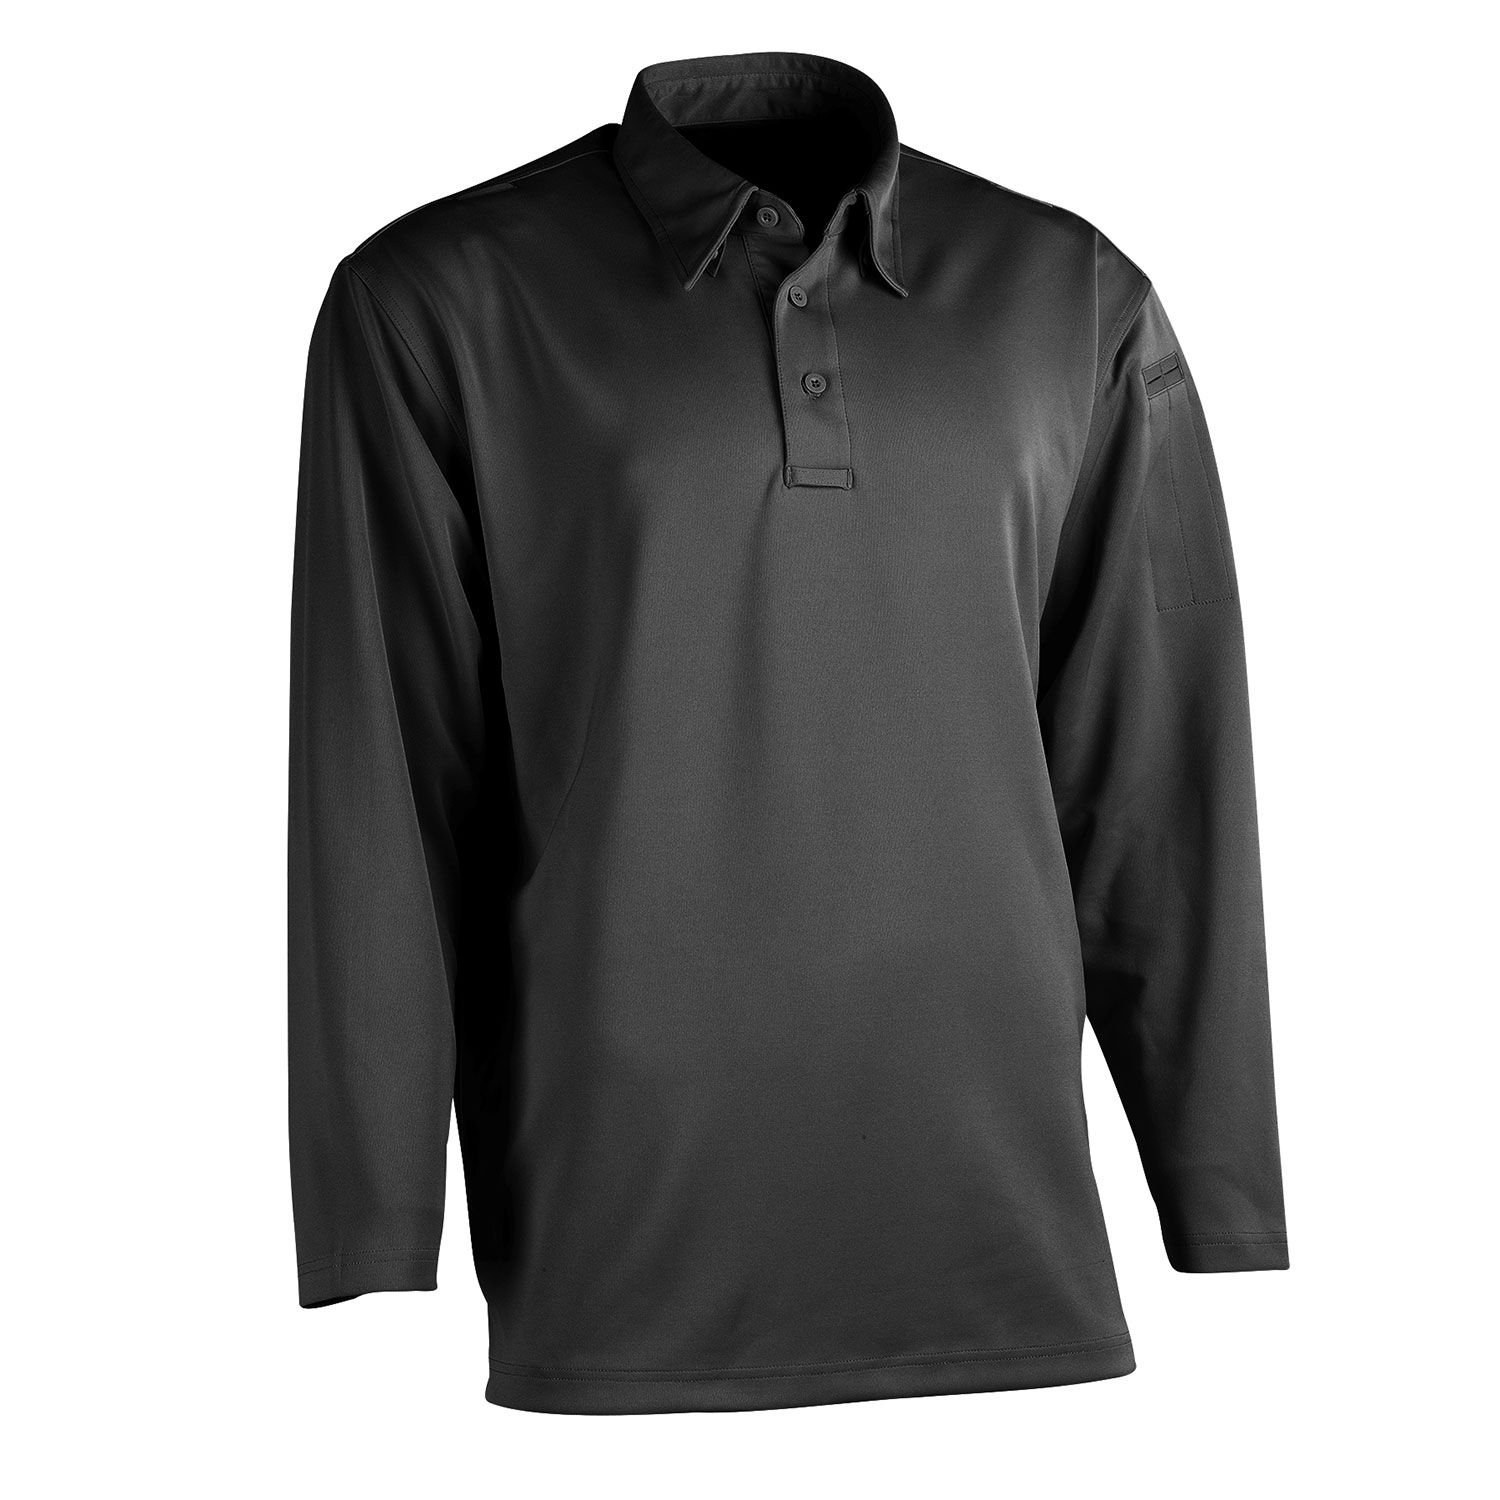 GALLS MENS LONG SLEEVE COOLBEST II PERFORMANCE POLO